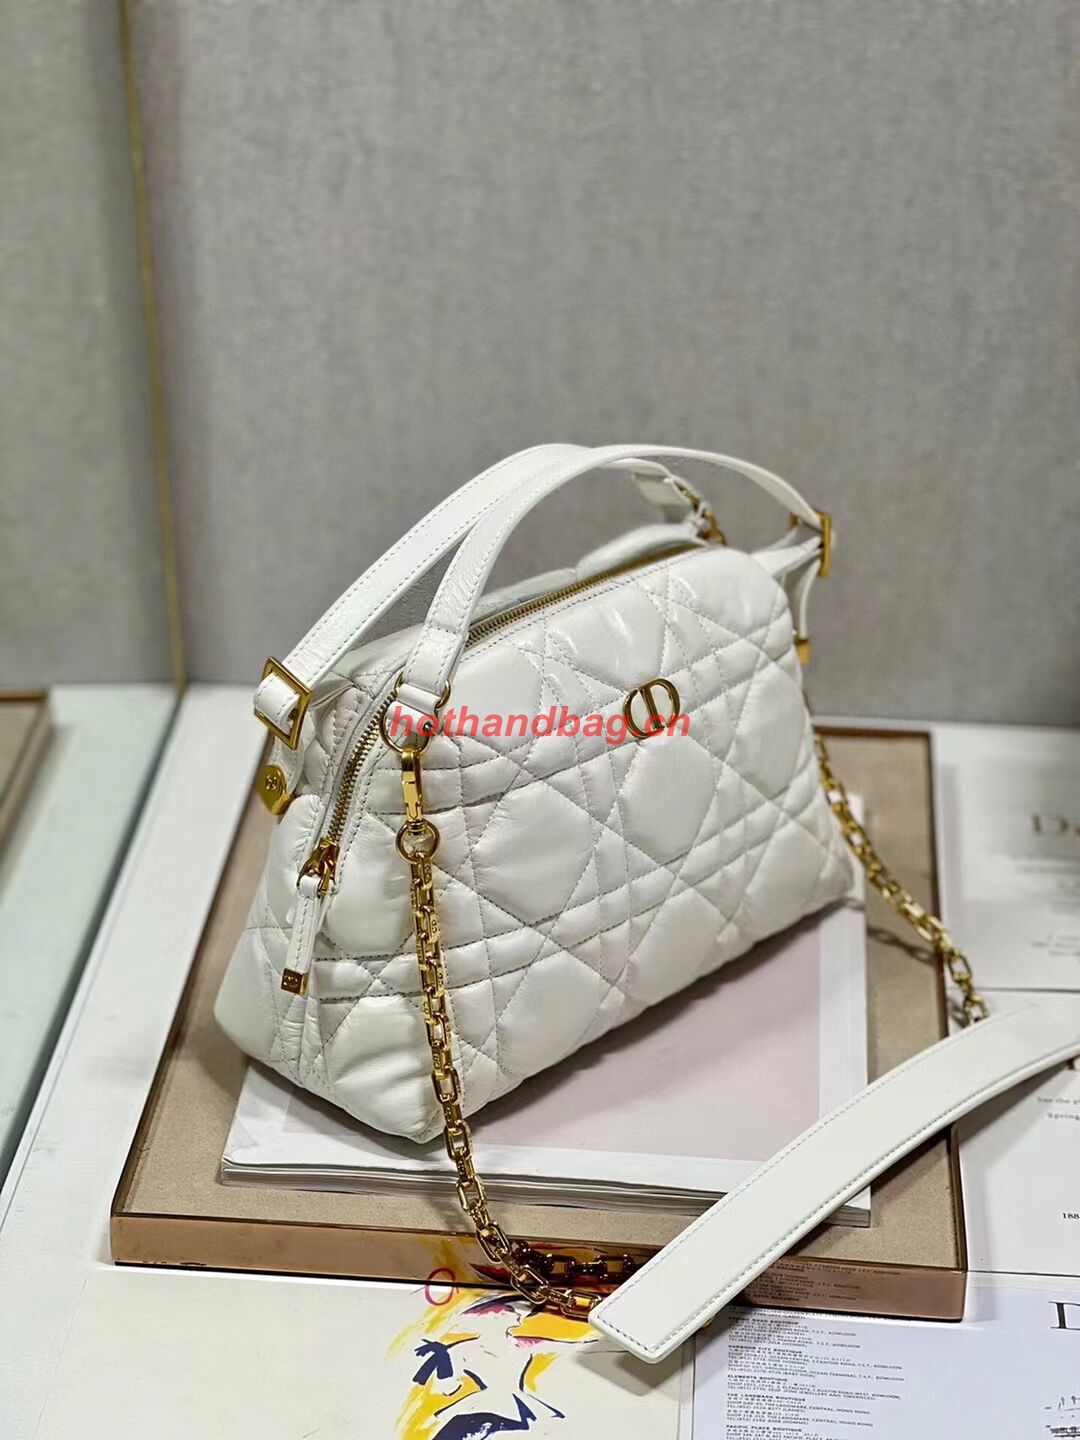 LADY DIOR TOP HANDLE SMALL BAG Latte Cannage Lambskin C0656 WHITE